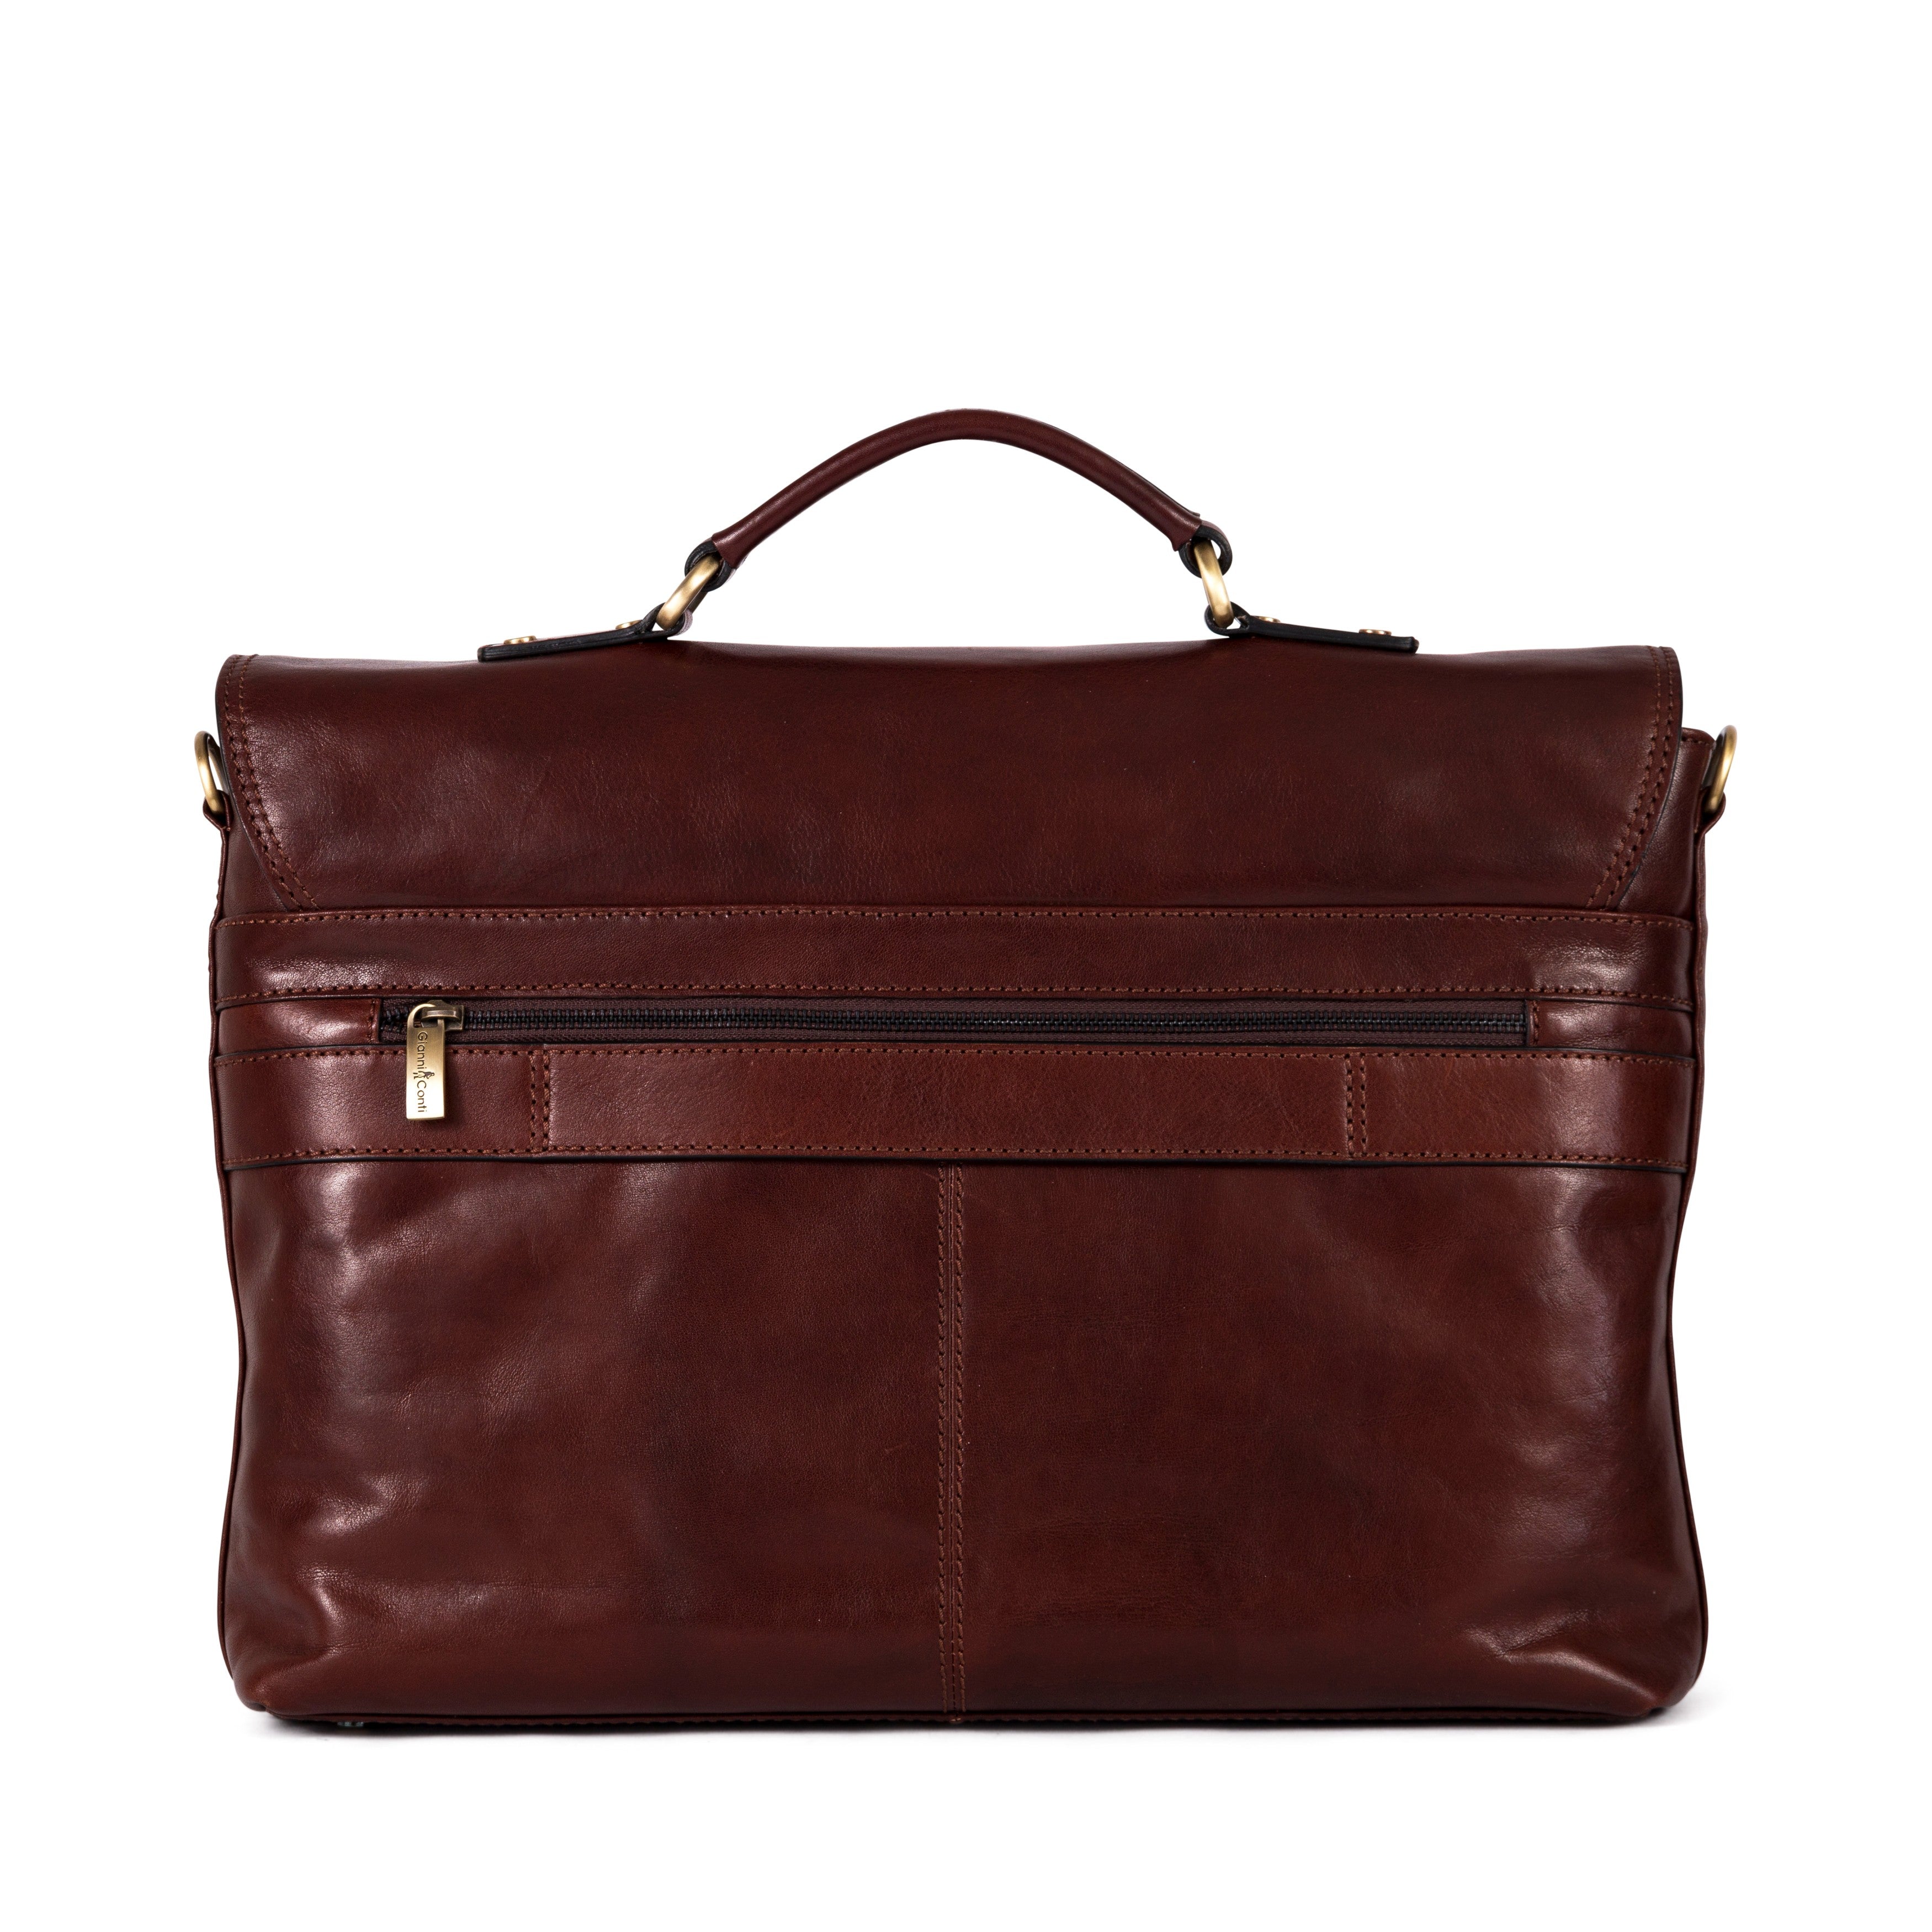 Gianni Conti EMILY Leather Briefcase - Made in Italy